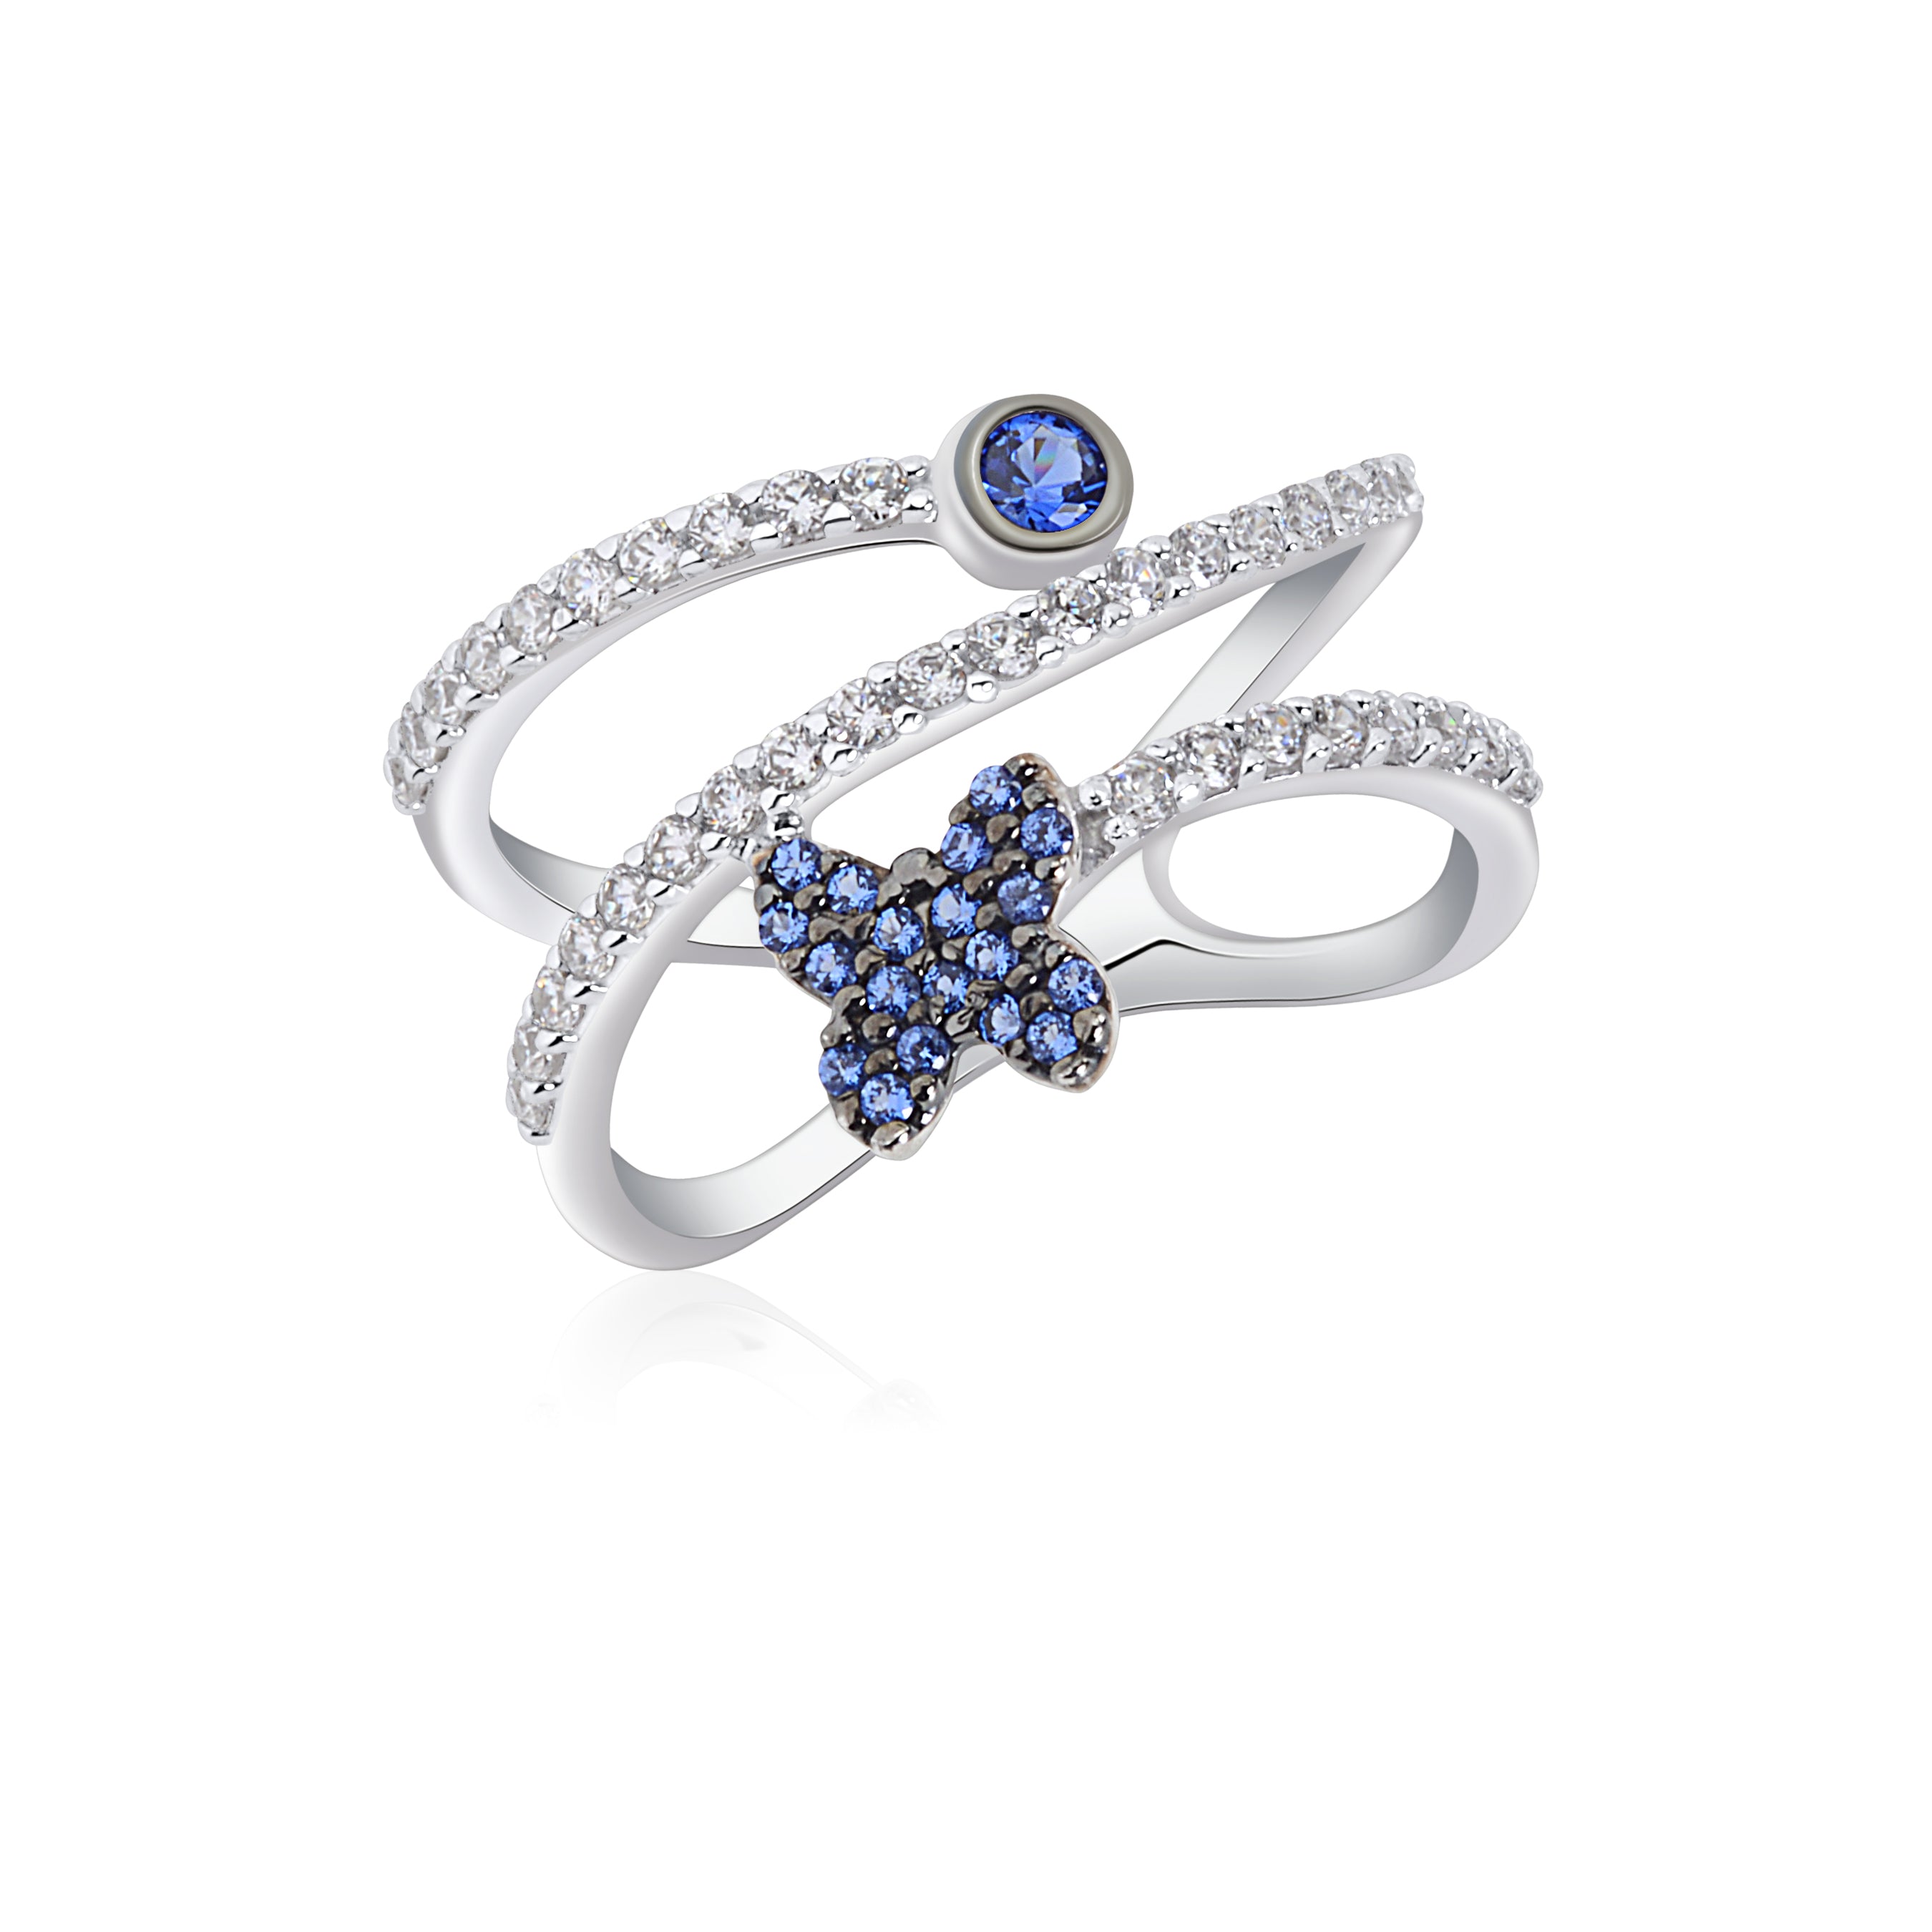 UNICORNJ 14K White Gold Wrap Around Ring with Red Green or Blue Butterfly Accent and Bezel Set CZ Italy